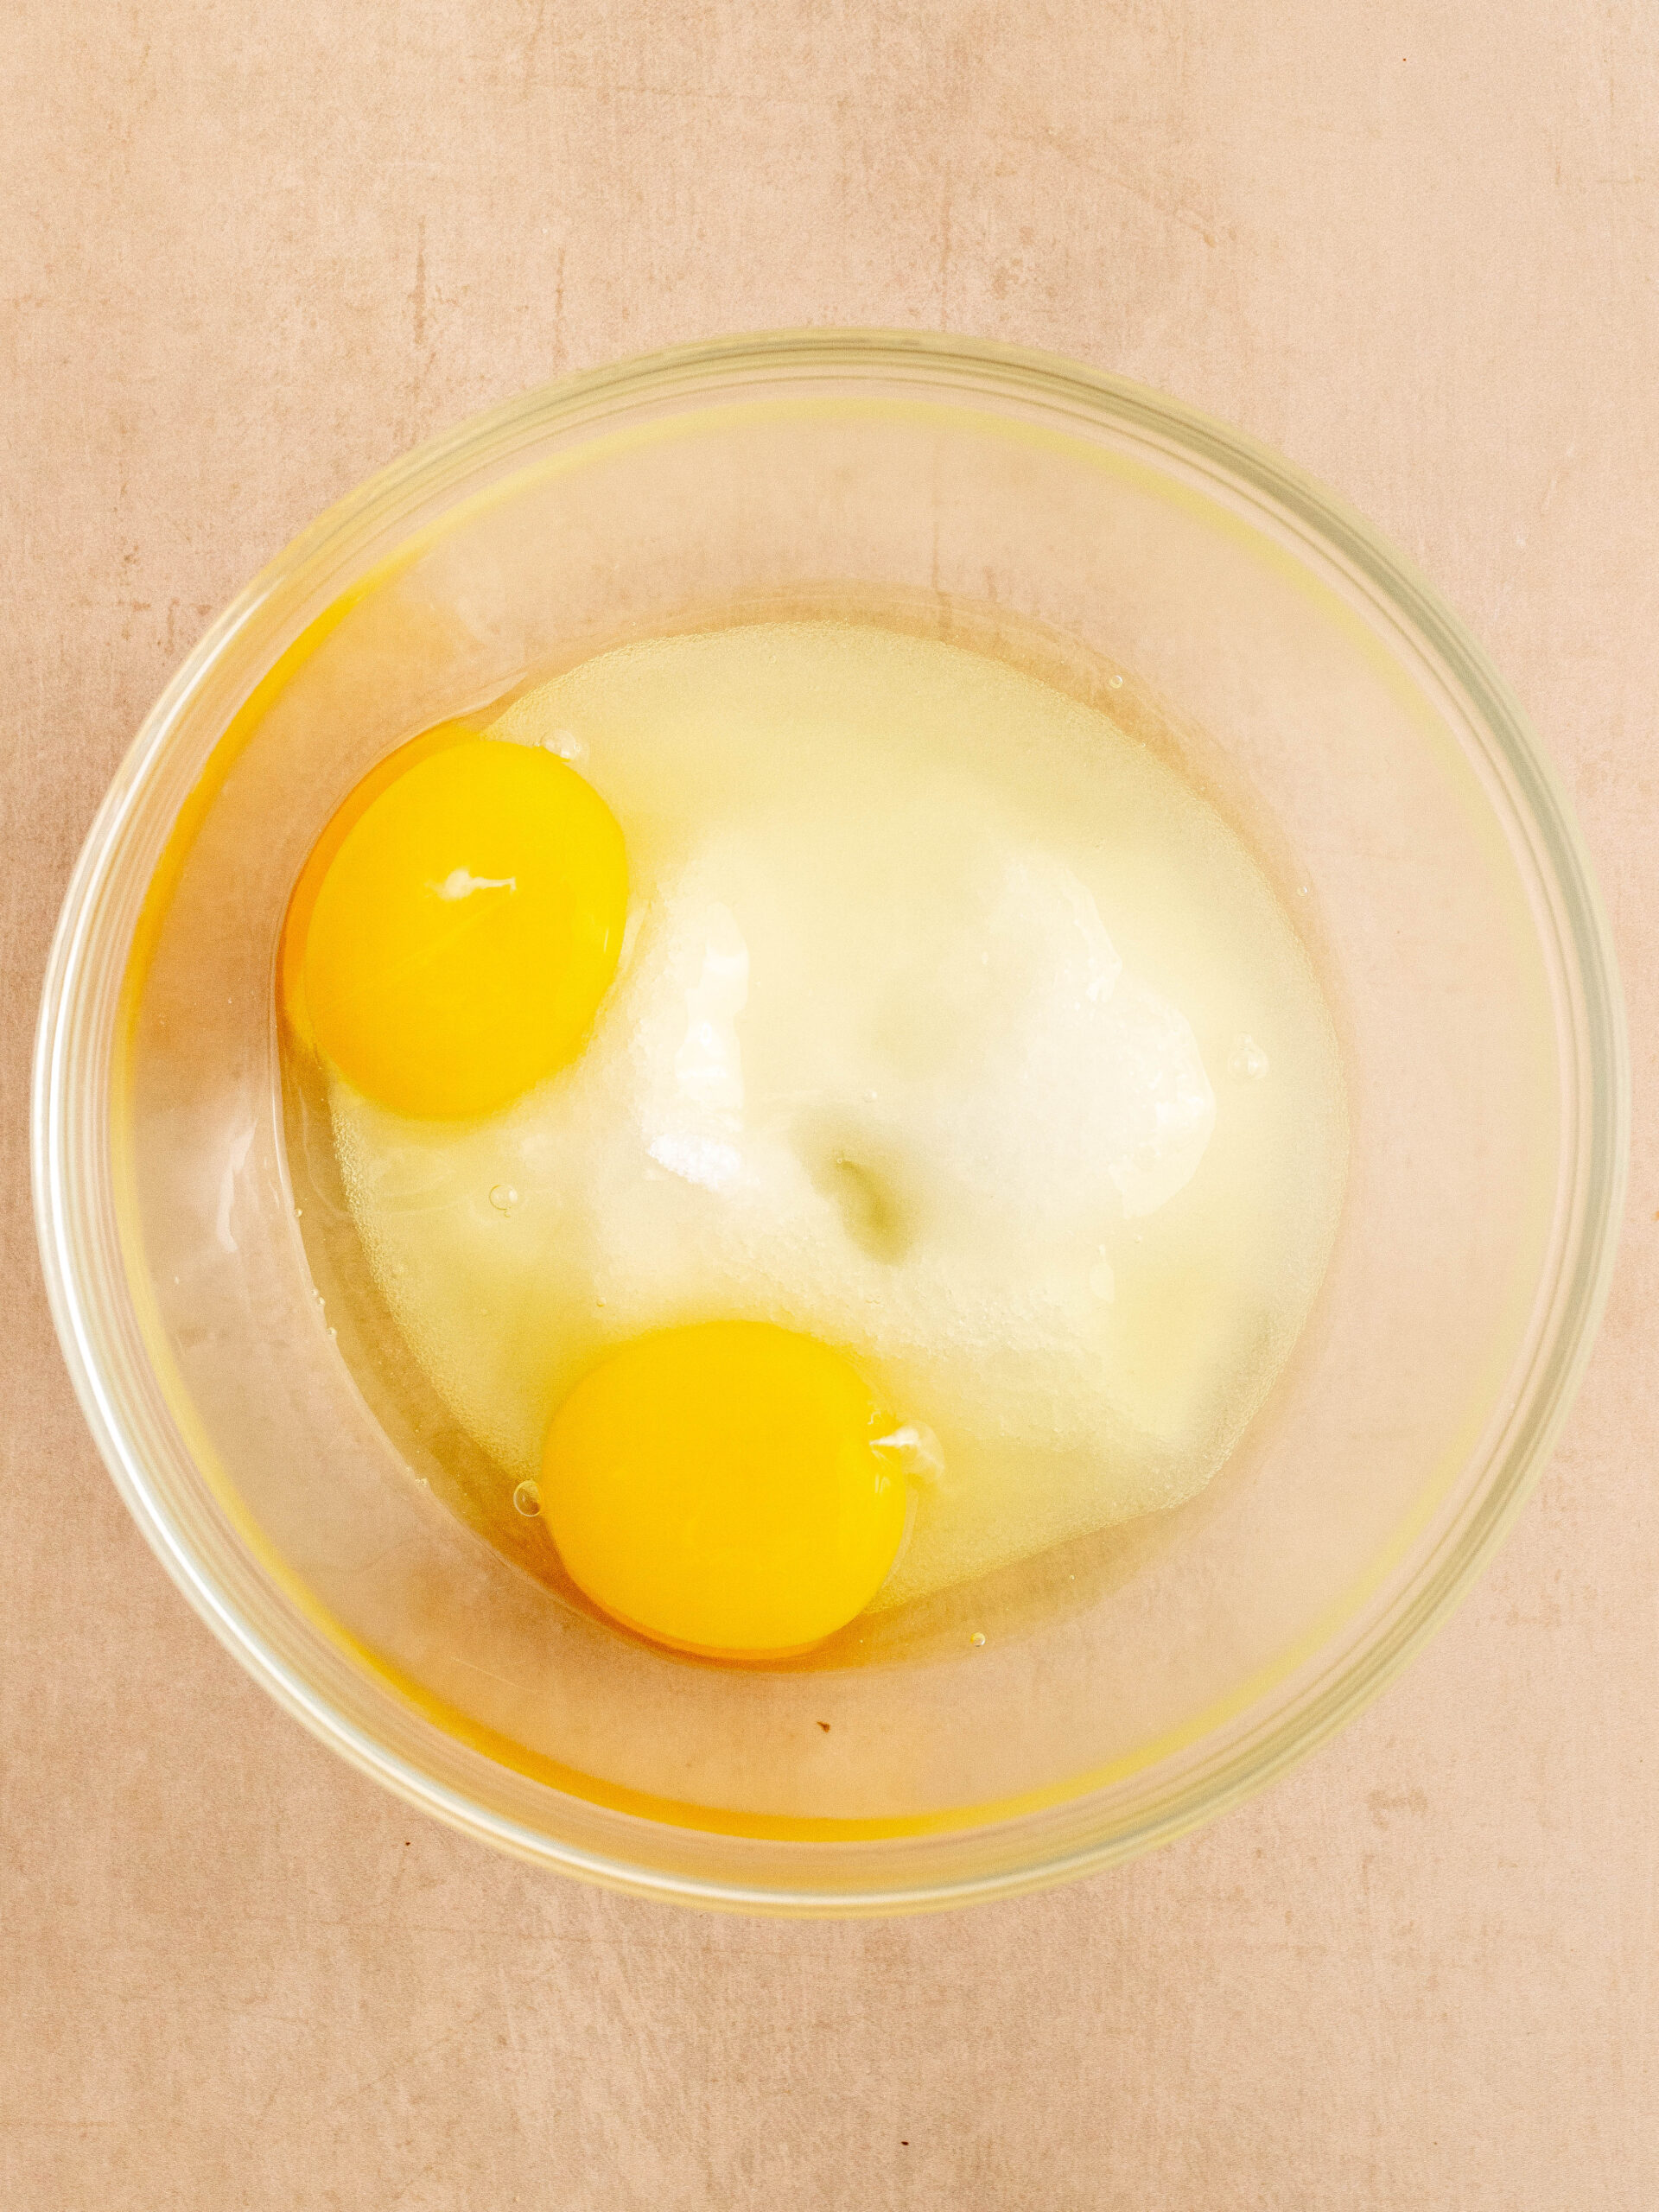 Step 1: Add eggs and sugar in a bowl